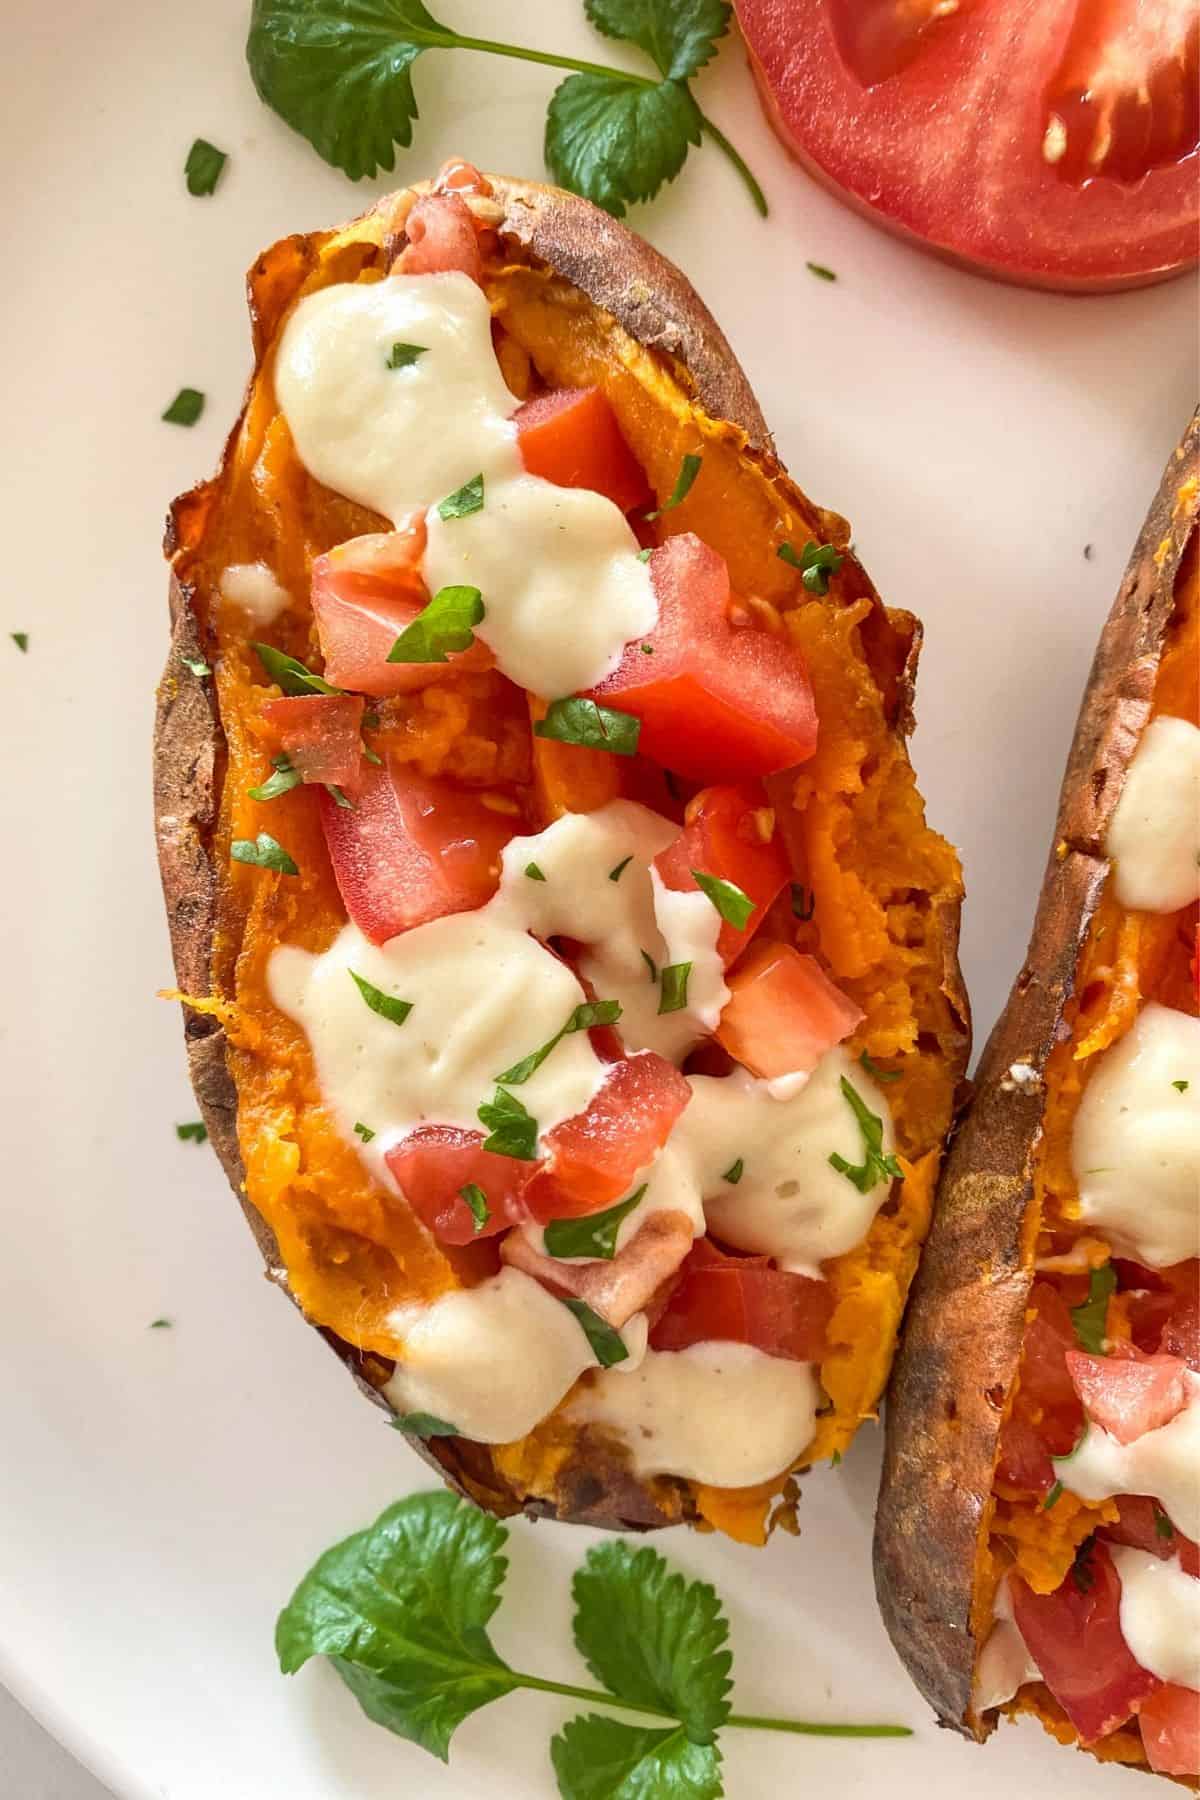 Close up of whole baked sweet potato sliced open and loaded with tomato, sour cream and parsley garnish.